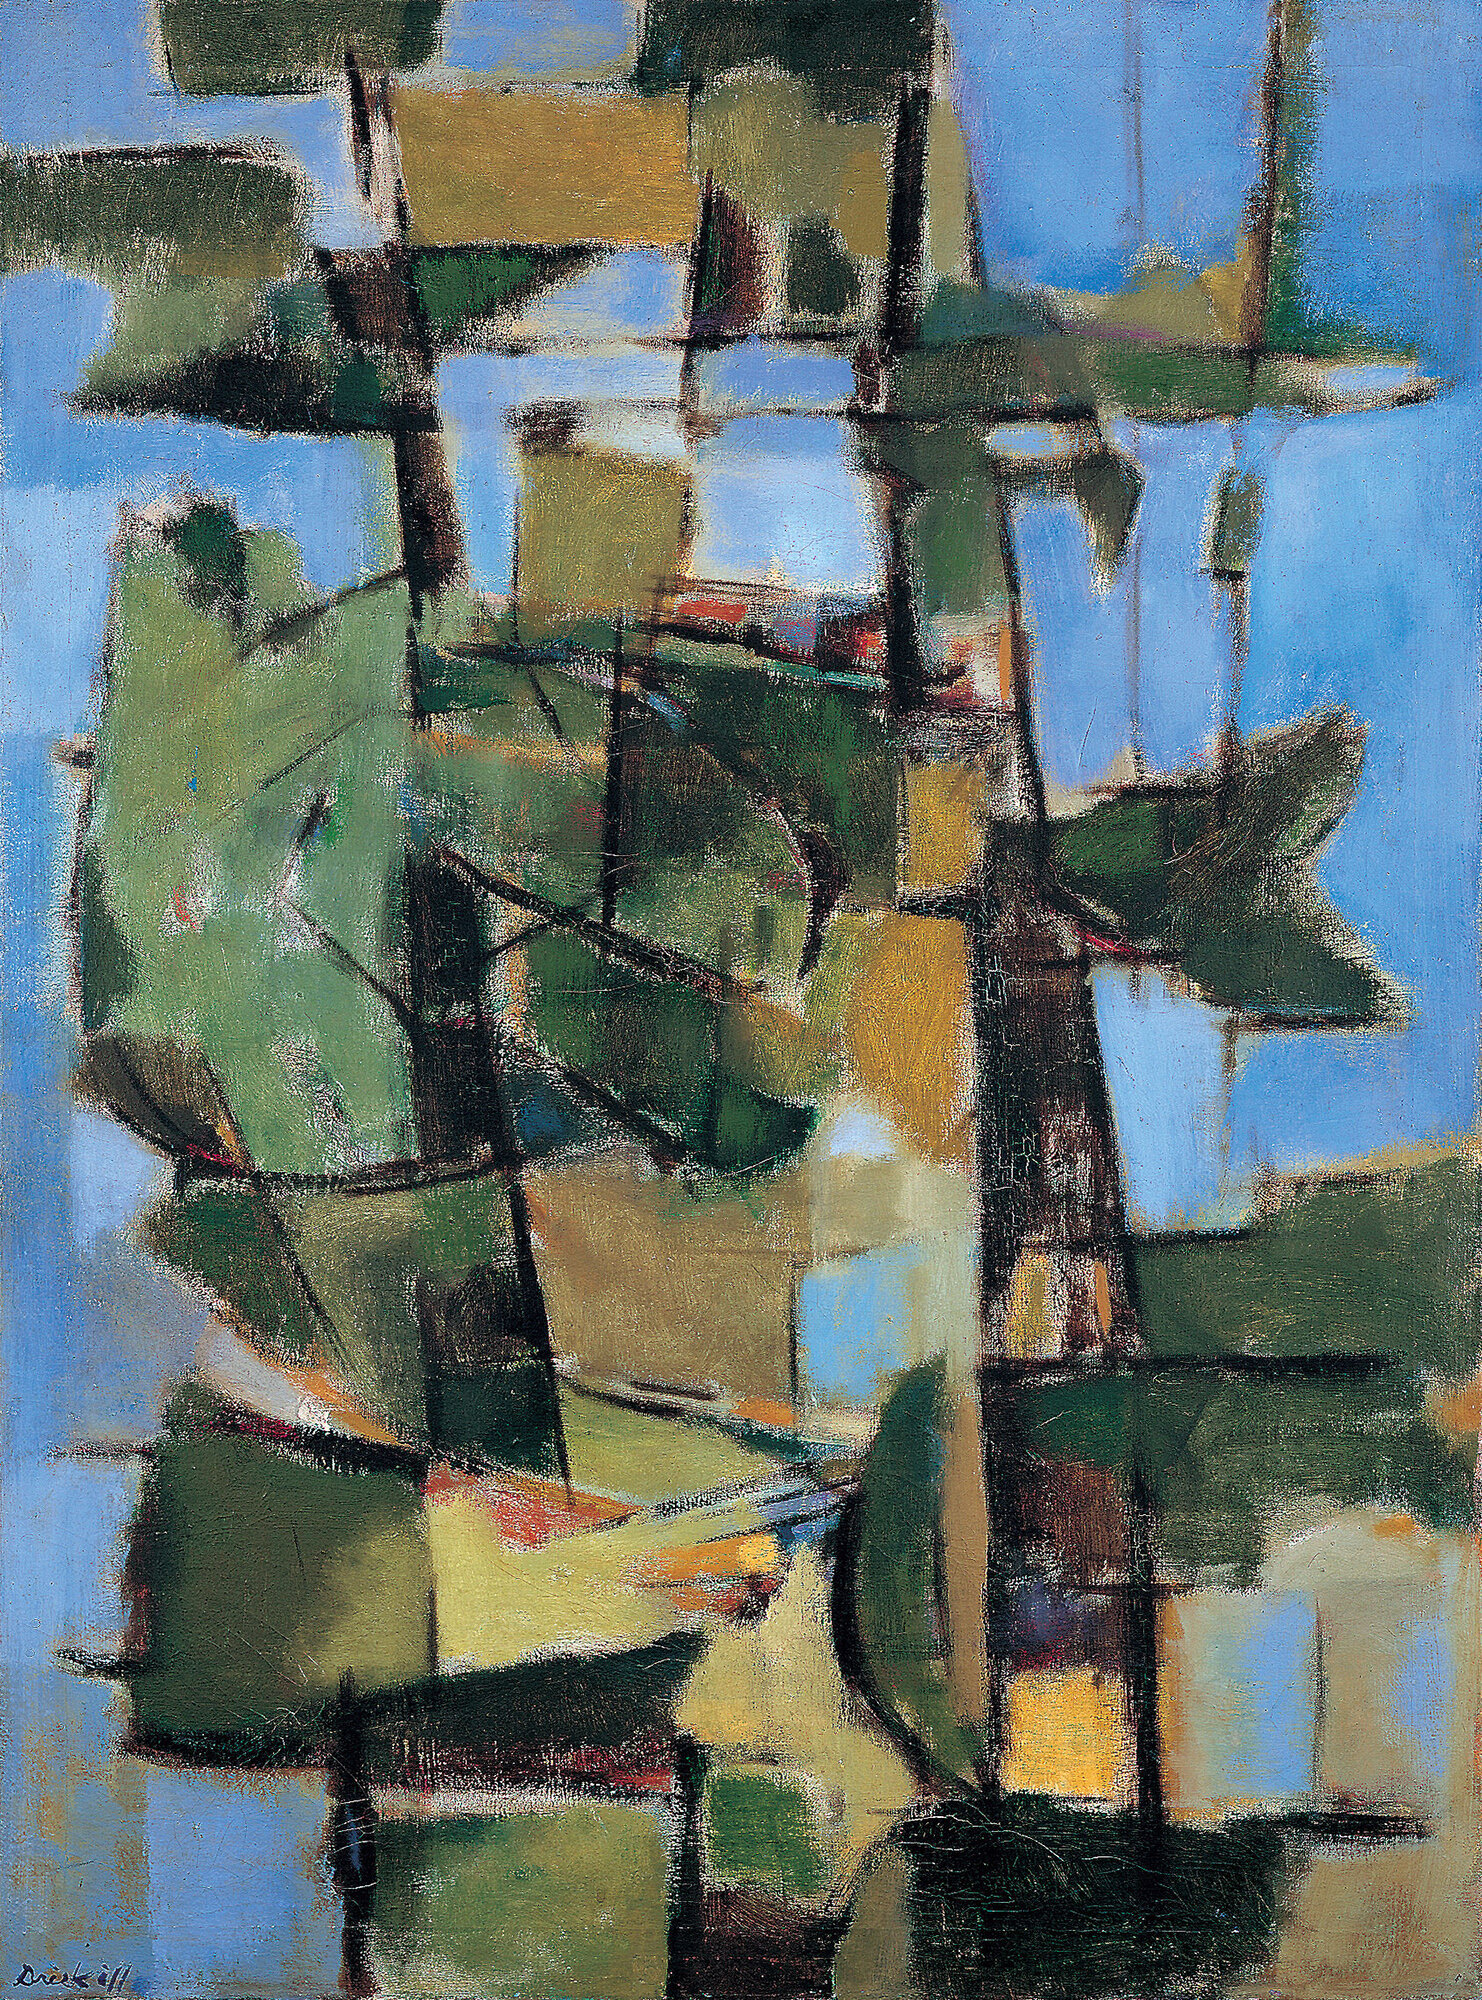  David C. Driskell (United States, 1931–2020),  Young Pines Growing , 1959, oil on canvas, 40 3/4 x 30 3/4 inches. Clark Atlanta University Art Museum, John Hope Franklin Purchase Award. © Estate of David C. Driskell 